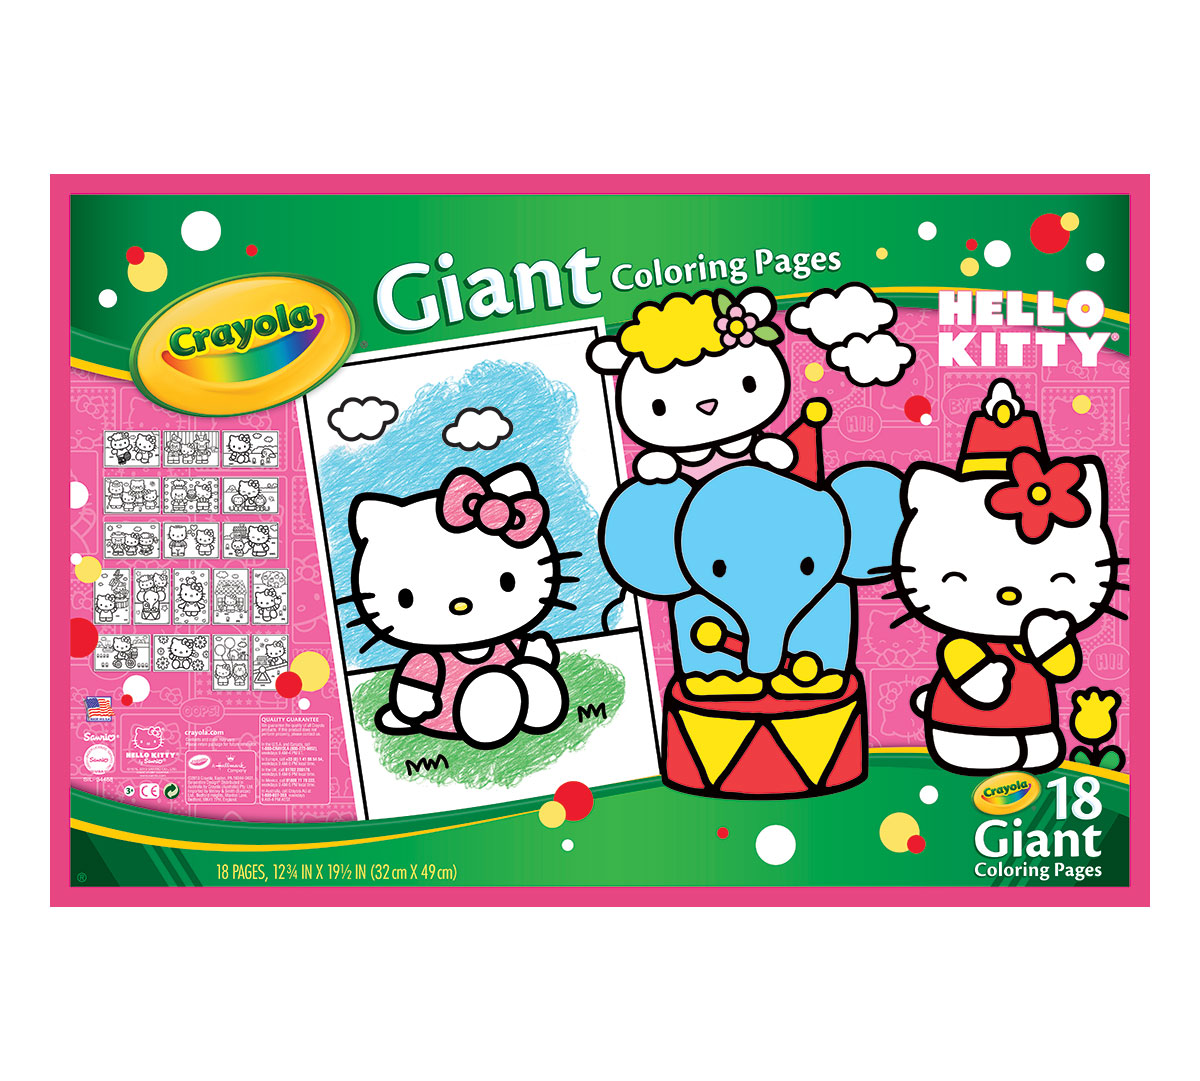 Giant Coloring Pages   Hello Kitty   Crayola